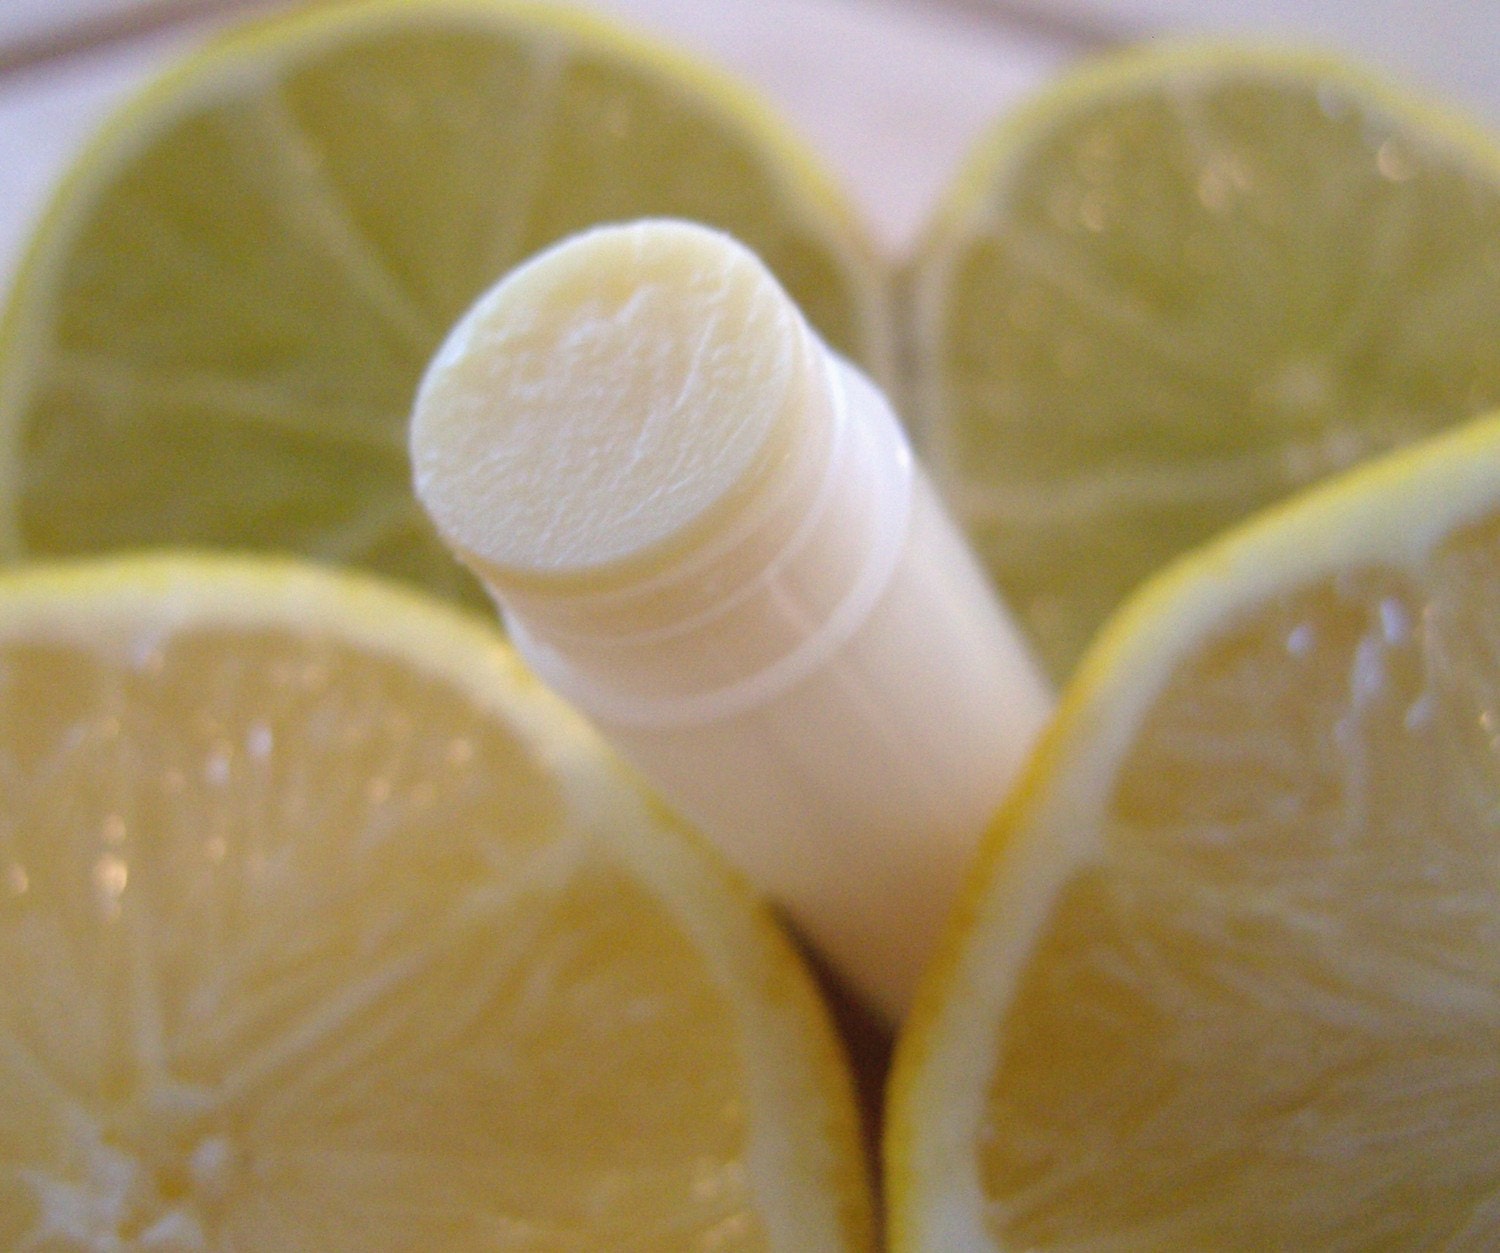 Key Lime Chap-Stick, a Lip-Loving Citrus Kiss of Pure Essential Oils, Local, Organic & Fair Trade Ingredients, Paraben and Petroleum Free